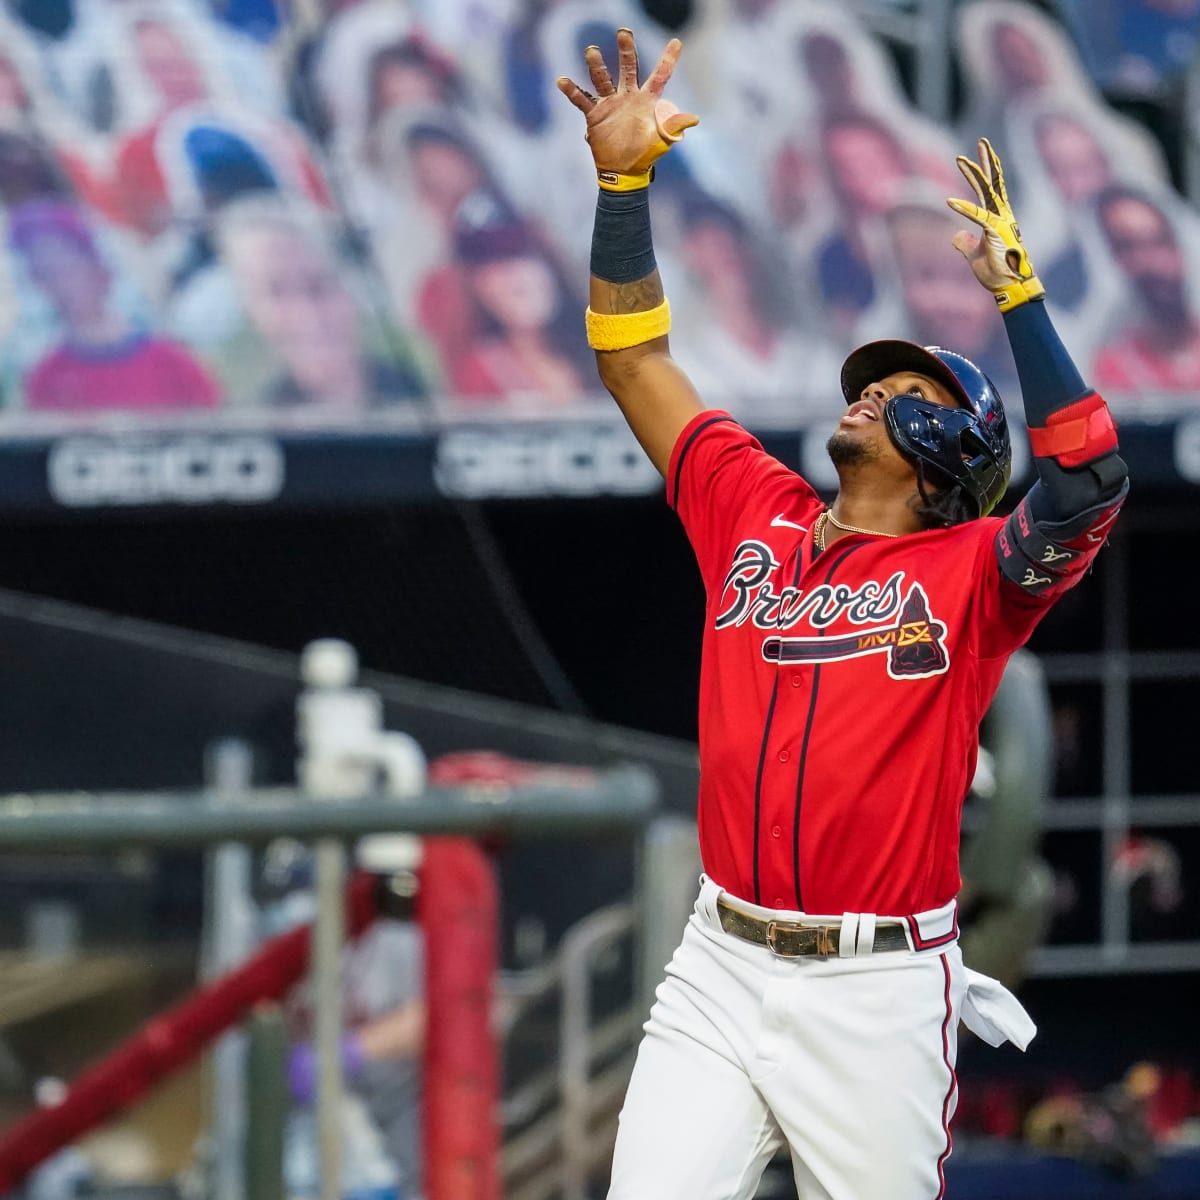 Ronald Acuna, Jr. healthy and ready for the Braves series with the